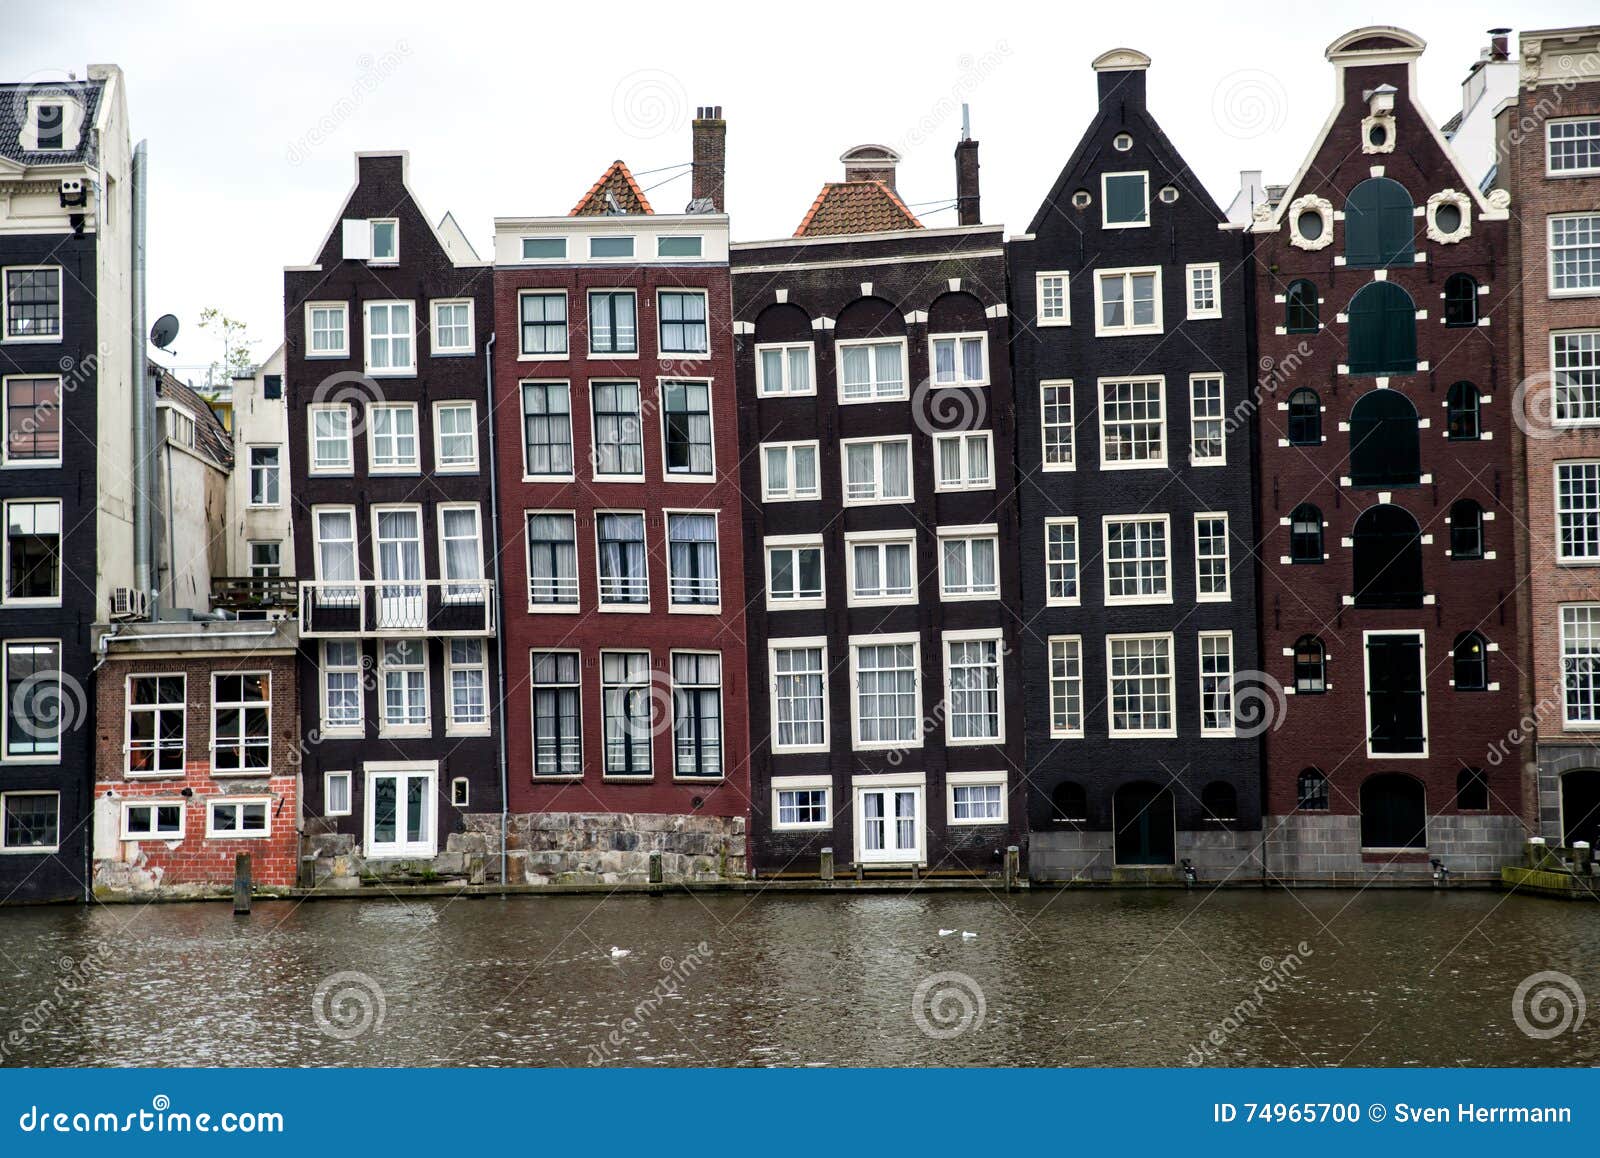 old slanting canal buildings in amsterdam